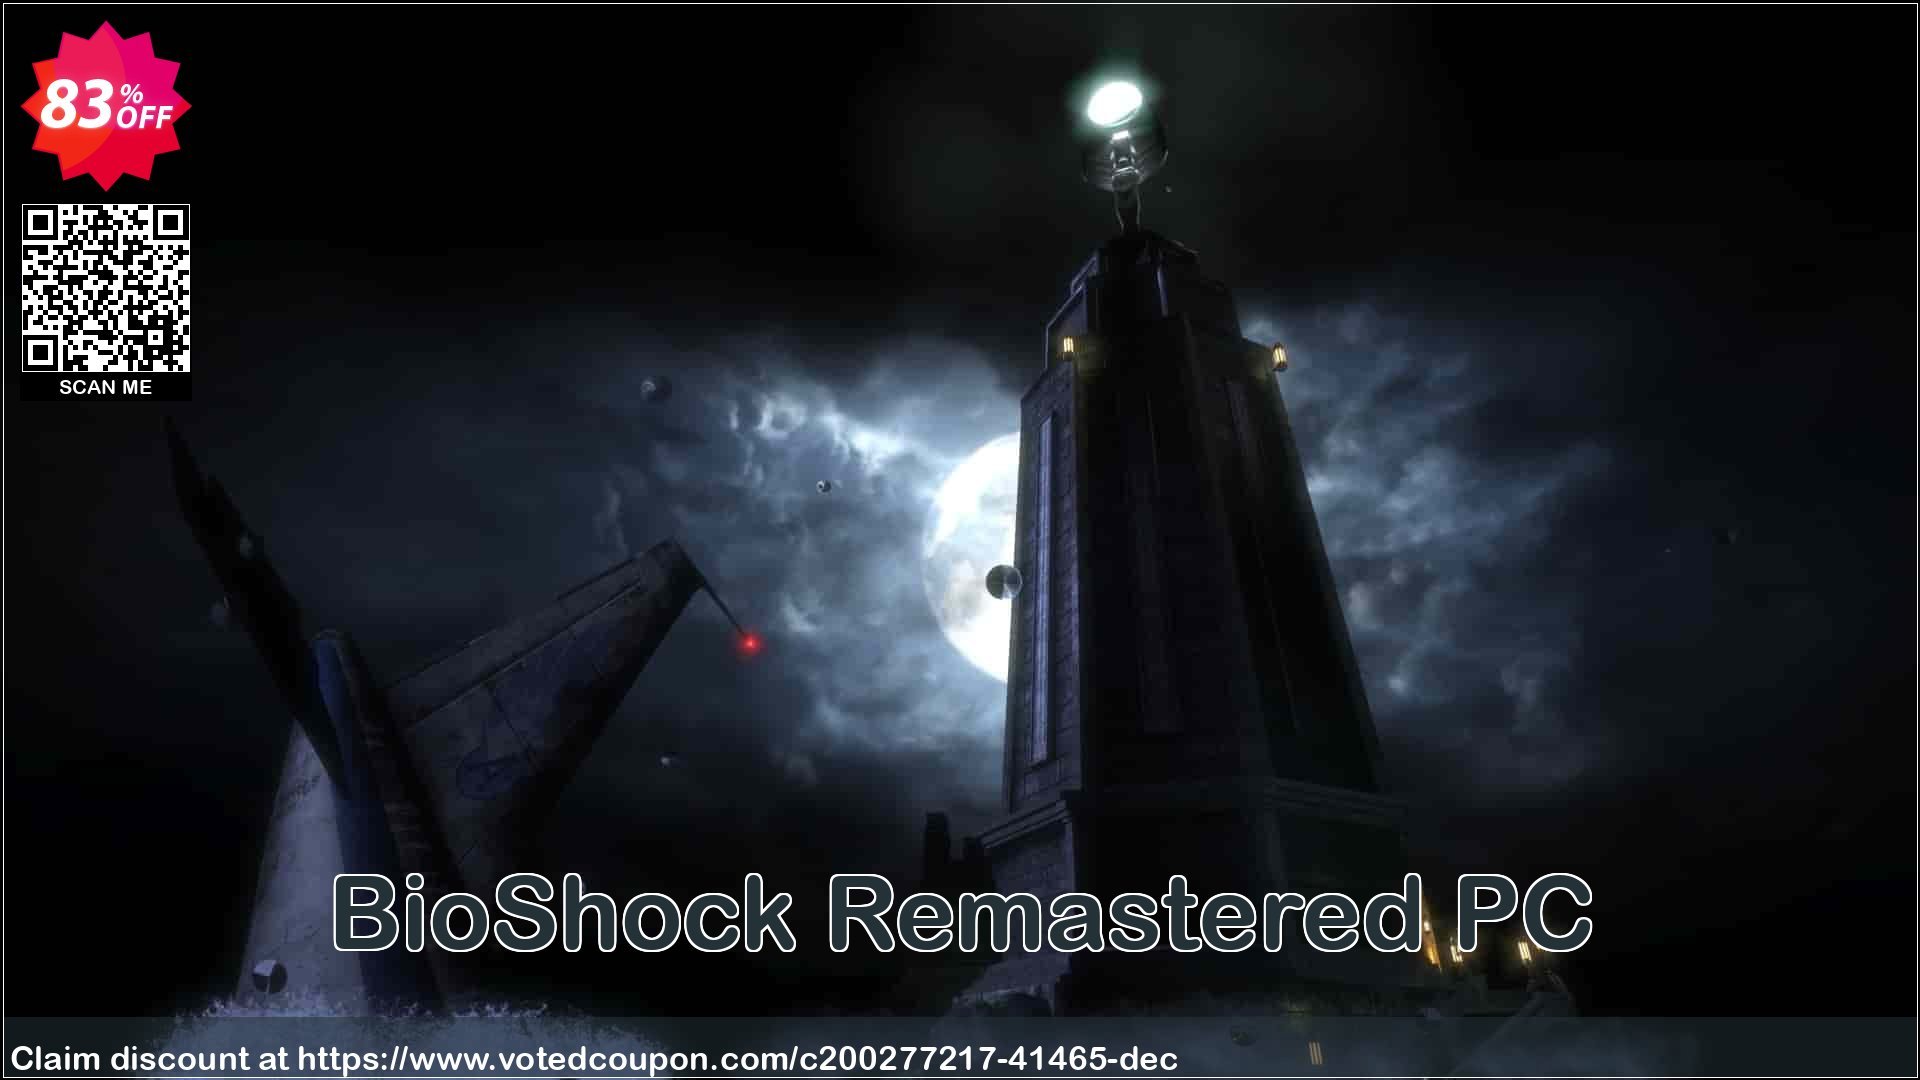 BioShock Remastered PC Coupon Code May 2024, 83% OFF - VotedCoupon